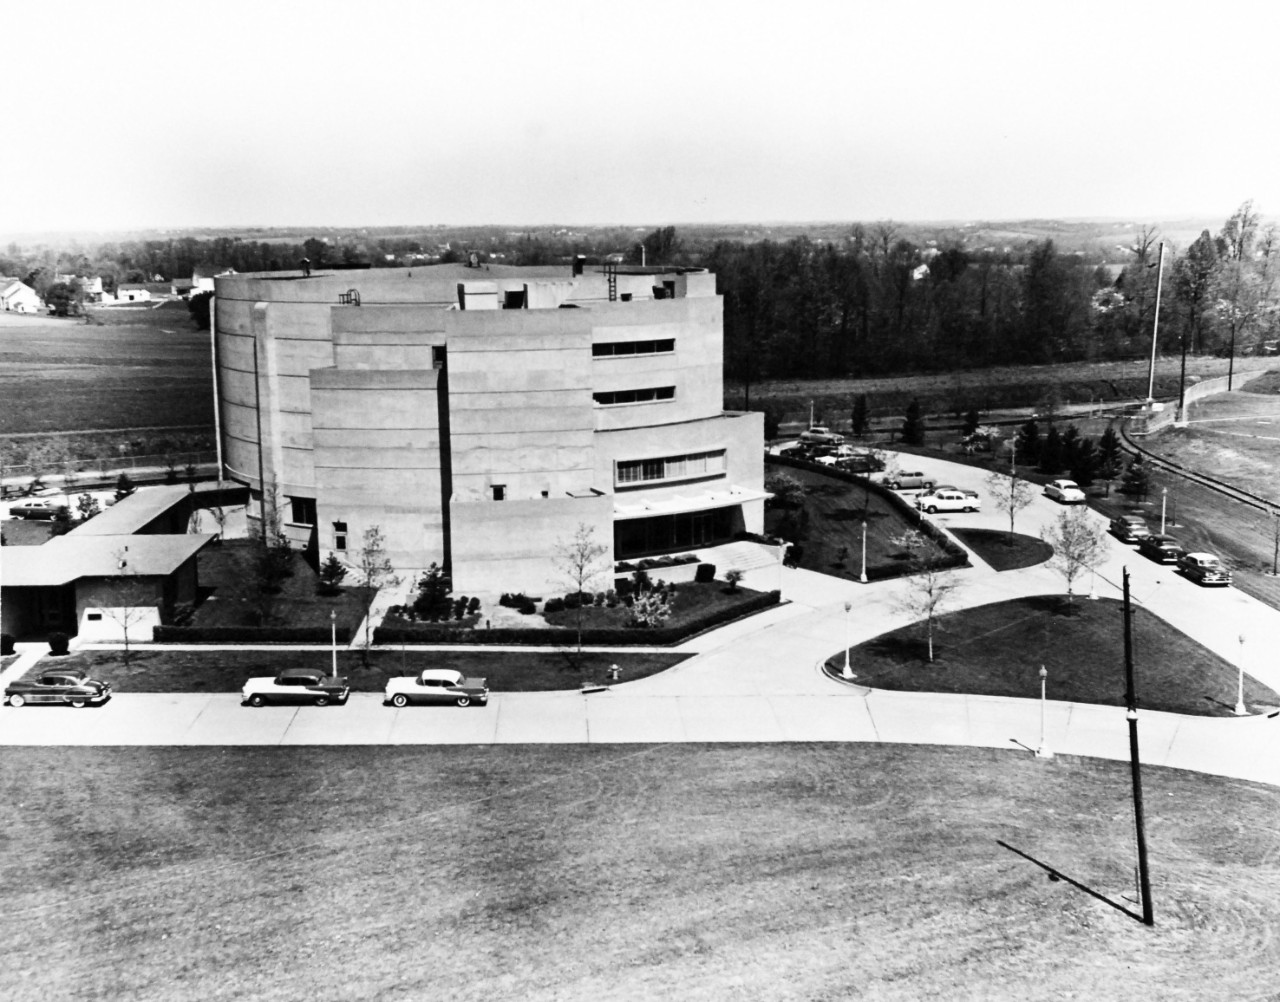 USN 1036458:  Aviation Medical Accelerator Laboratory (AMAL), late 1950s.   As a vital part of the Naval Air Development Center at Johnsville, Pennsylvania, the AMAL houses the world’s largest human centrifuge in the center of the of the 110-foot floor is a 180-tone, 4,000 horsepower vertically mounted D-C motor.  Used in researching simulated space flights, the motor has an instantaneous rating of 16,000hp, late 1950s.   AMAL is noted for being used for flight simulation training for the Project Mercury astronauts.   Official U.S. Navy Photograph, now in the collections of the National Archives.  